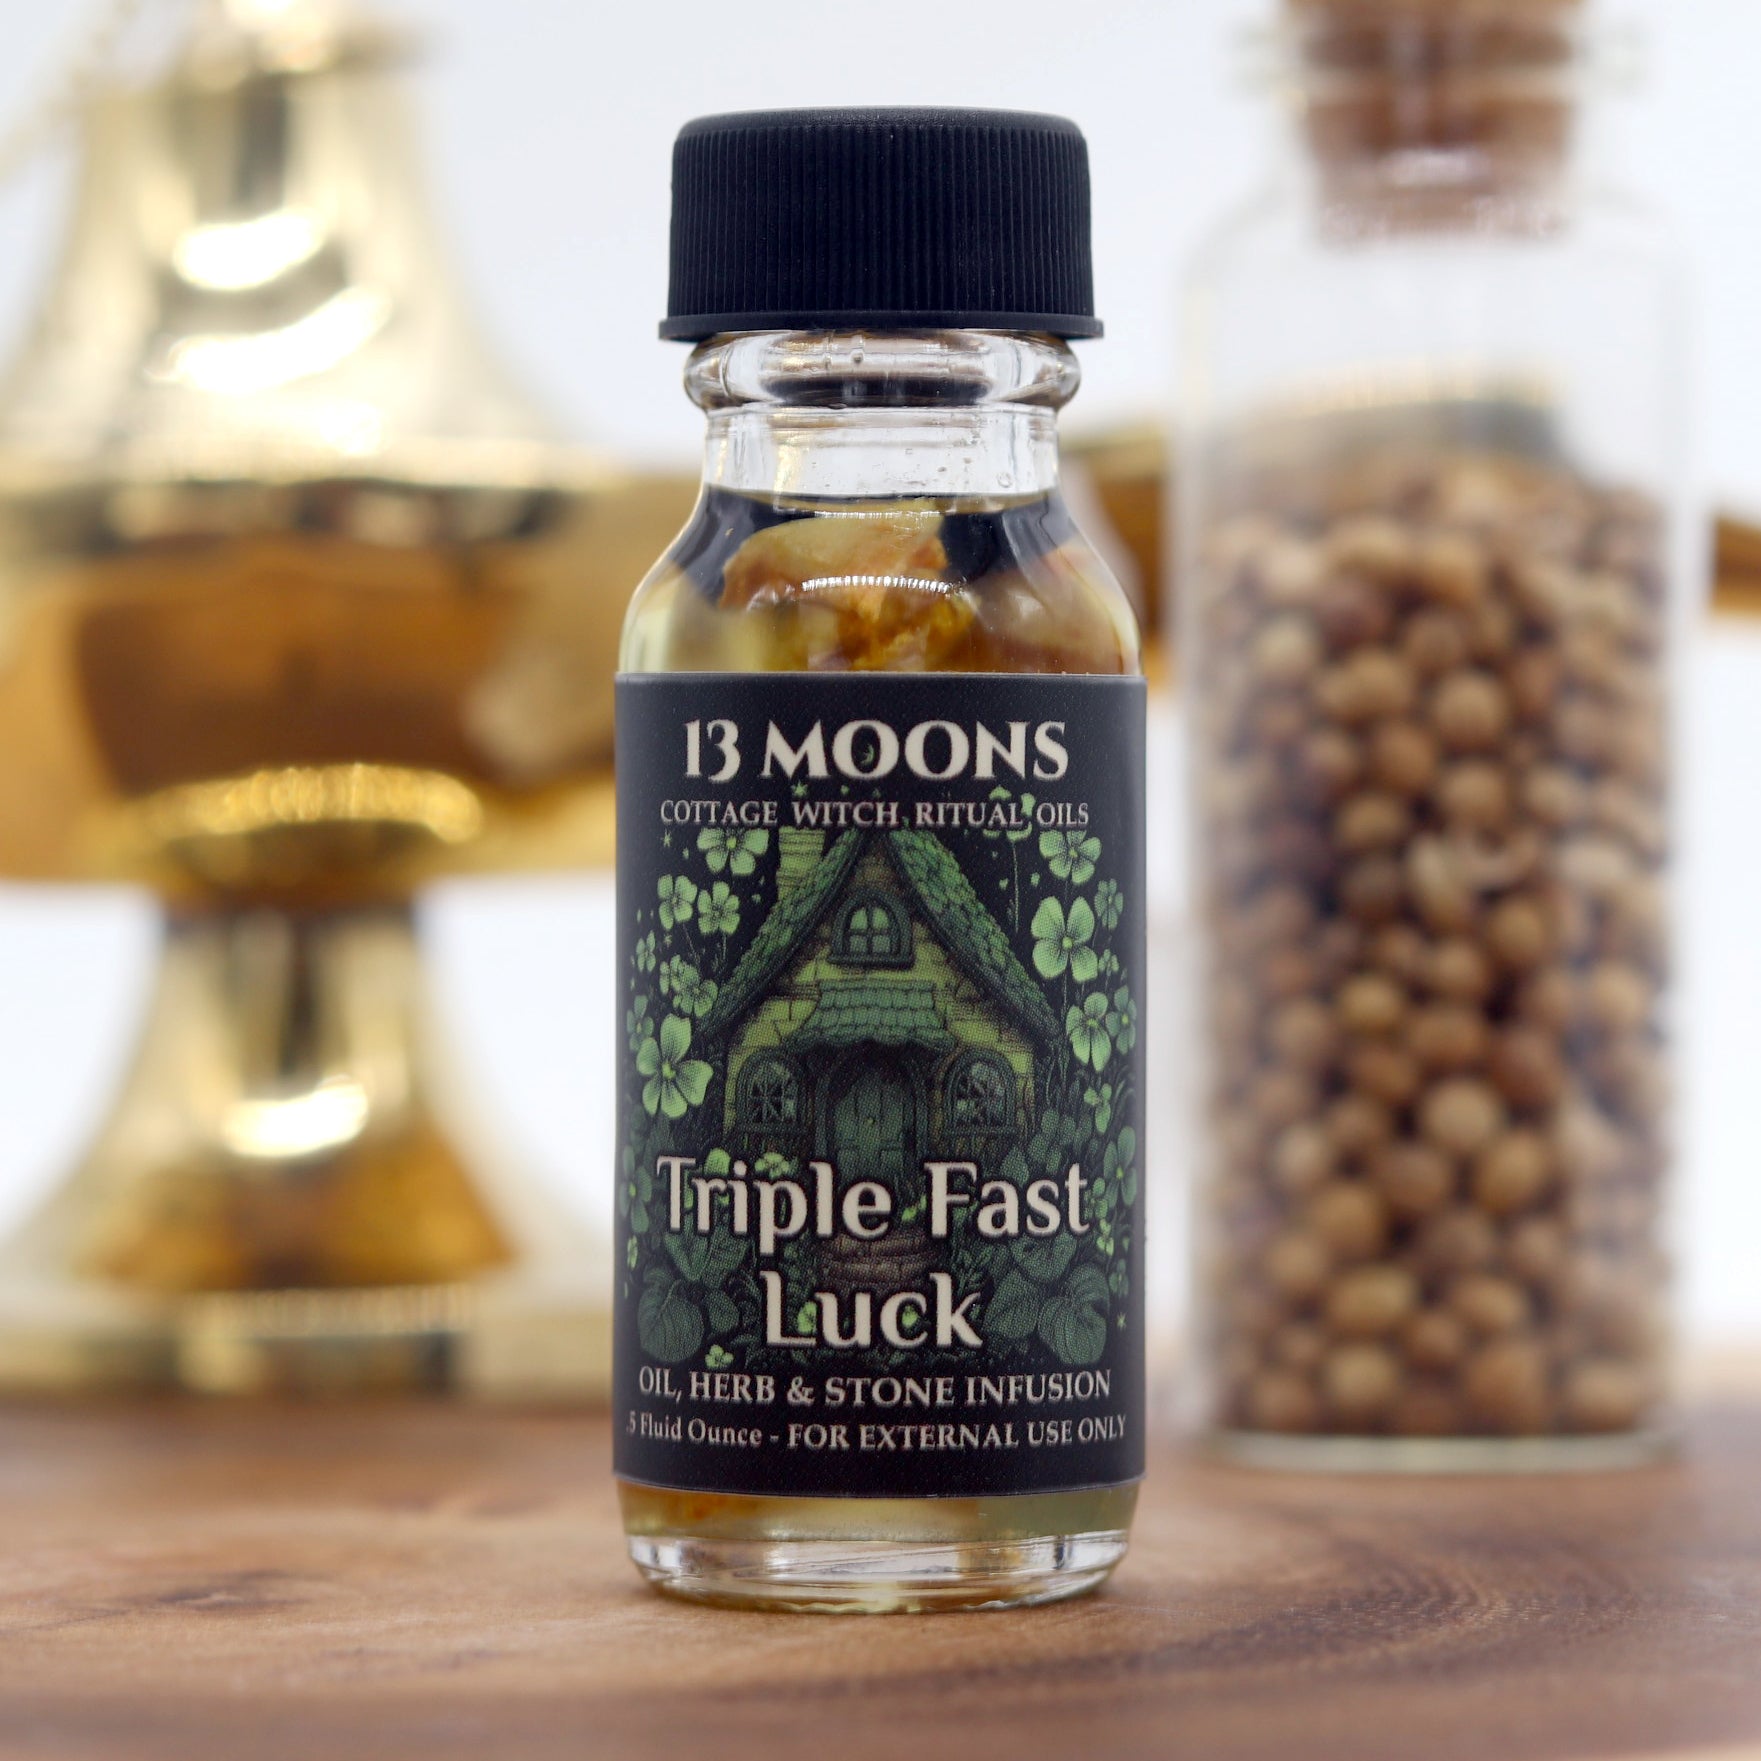 Triple Fast Luck Ritual Oil by 13 Moons - 13 Moons